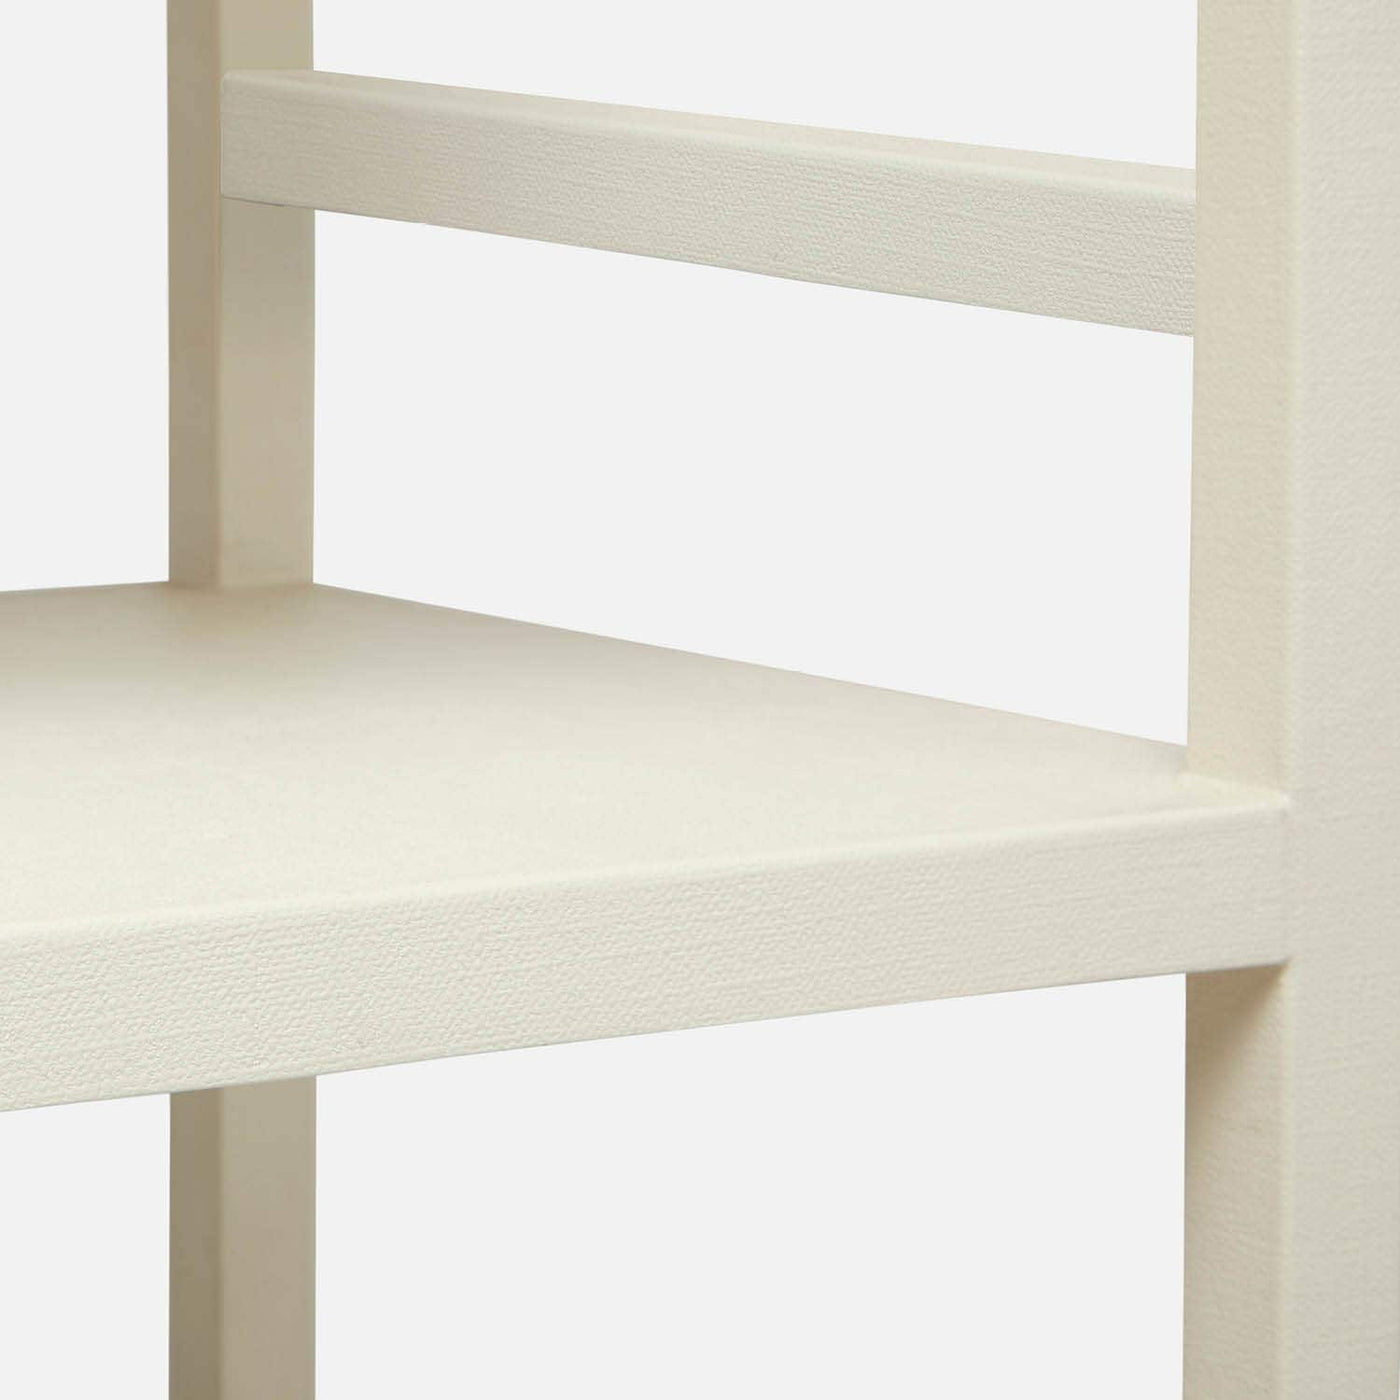 BOOKCASE FAUX LINEN (Available in 2 Finishes)